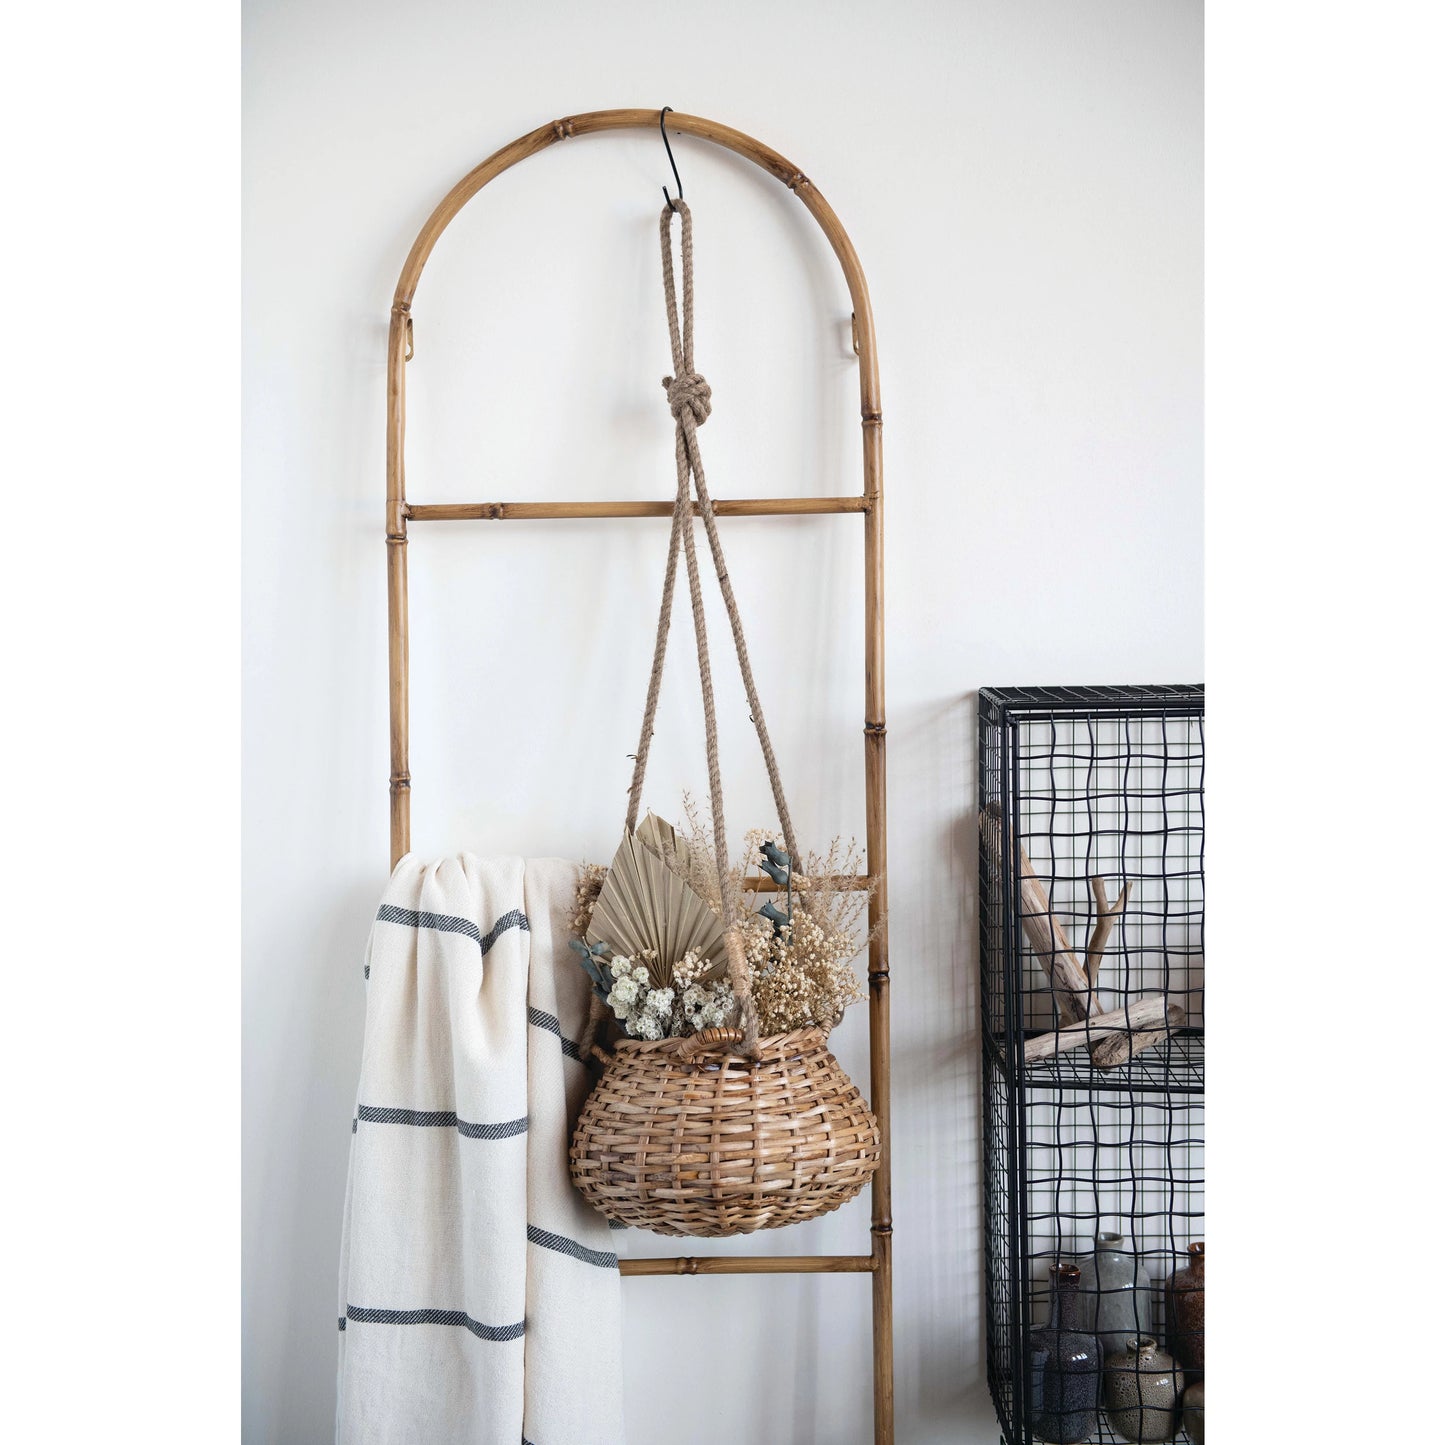 Natural Hand-woven Basket with Rope Hanger